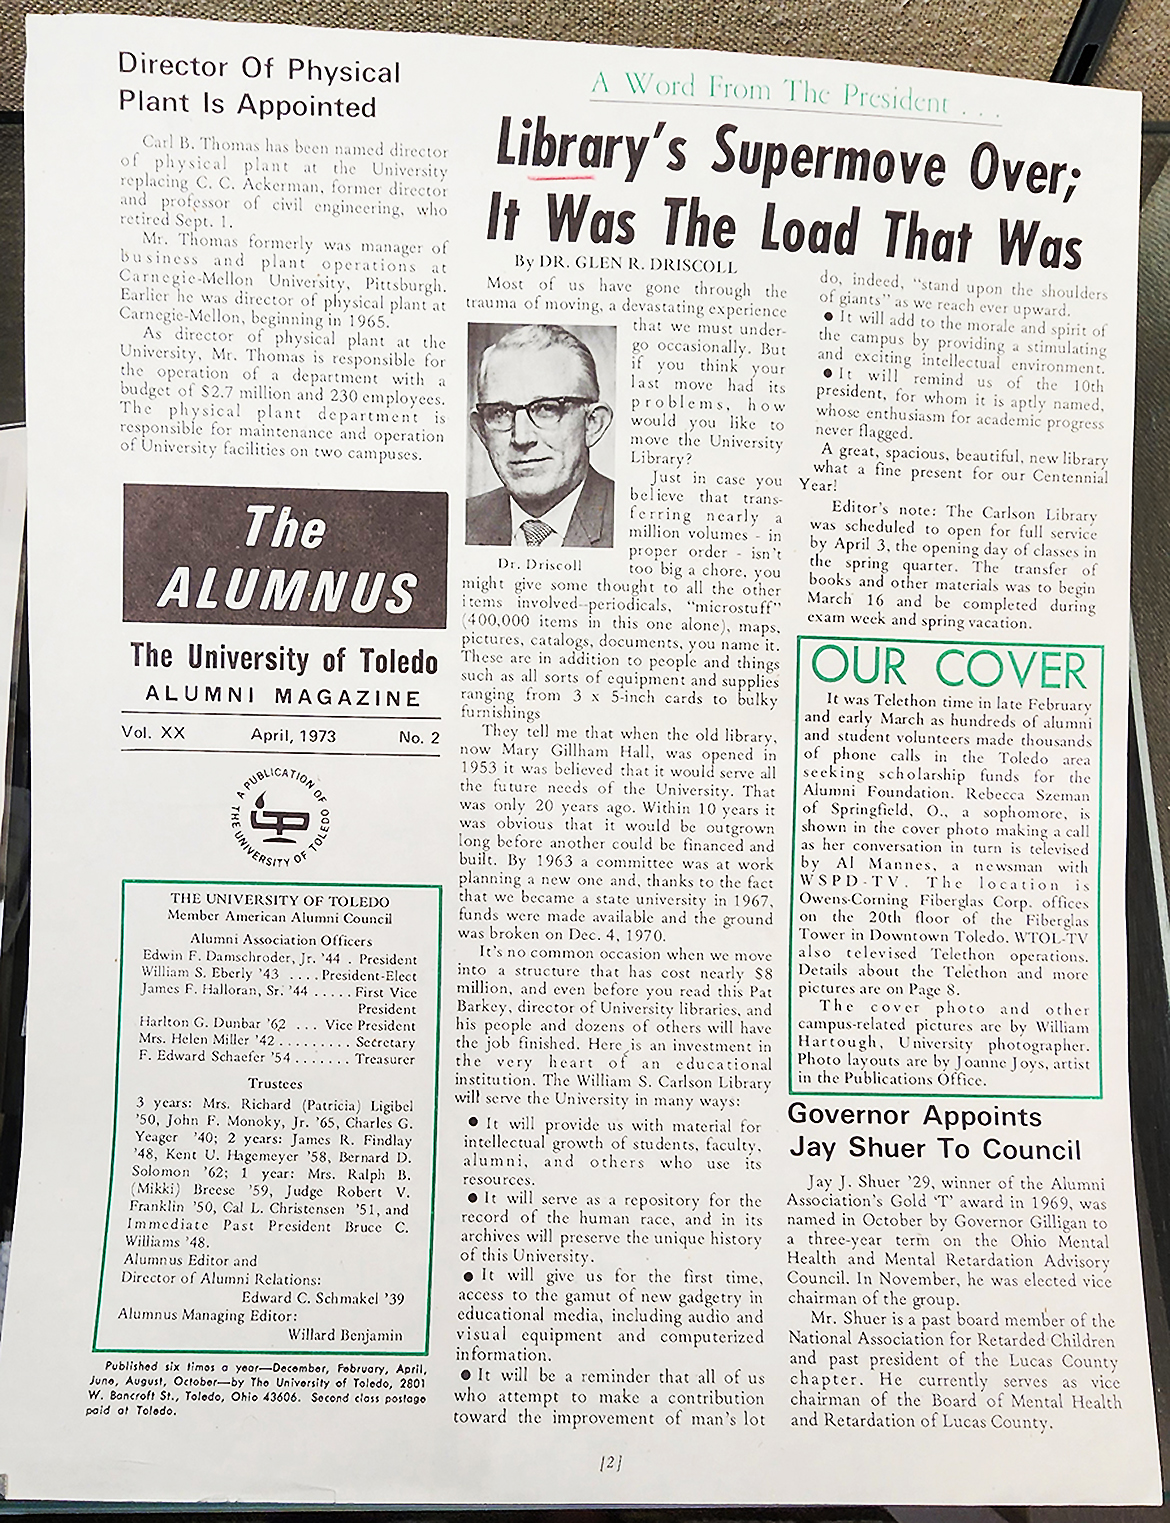 Library's Supermove Over;It Was the Load That Was, Alumuns article: April 1973